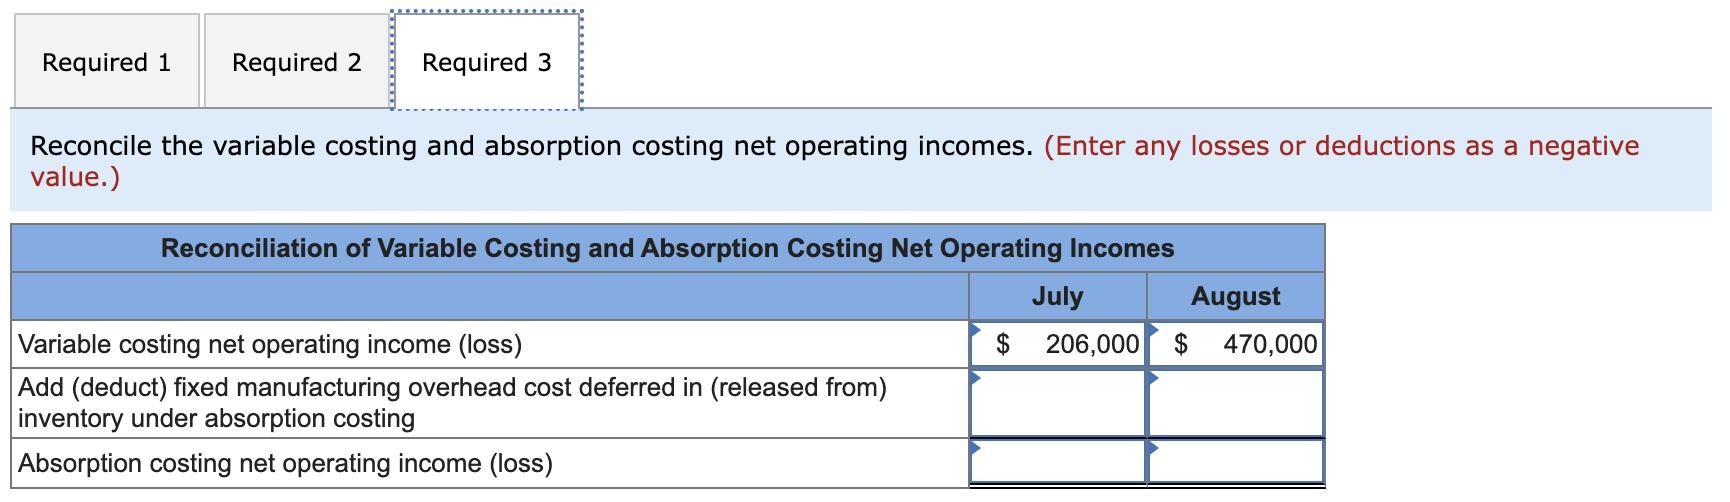 Required 1 Required 2 Required 3 Reconcile the variable costing and absorption costing net operating incomes.